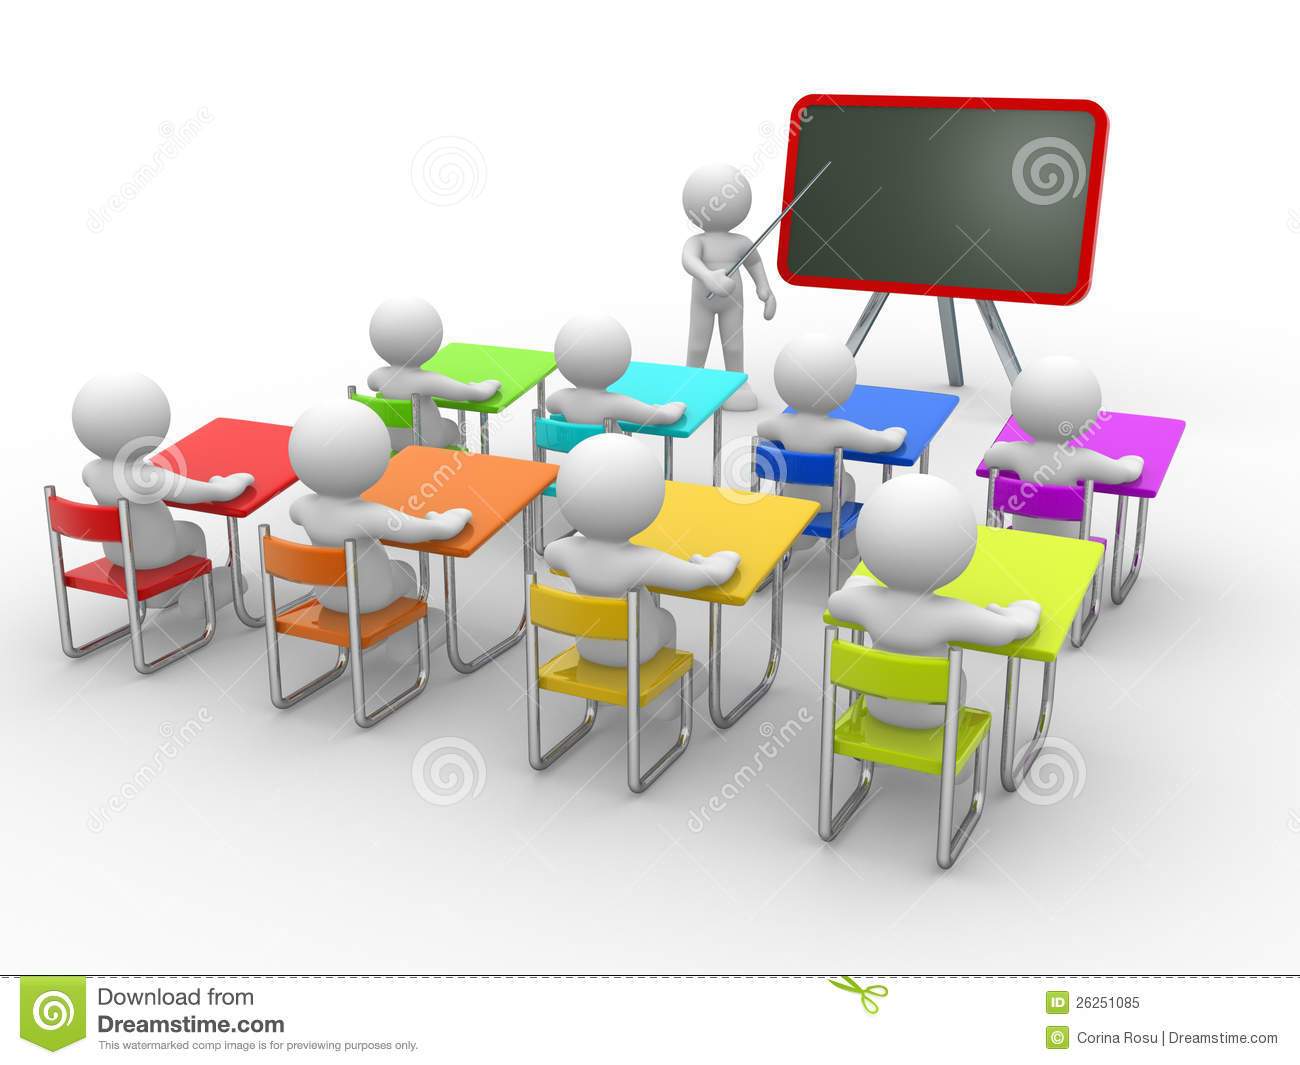 classroom clipart images discussion